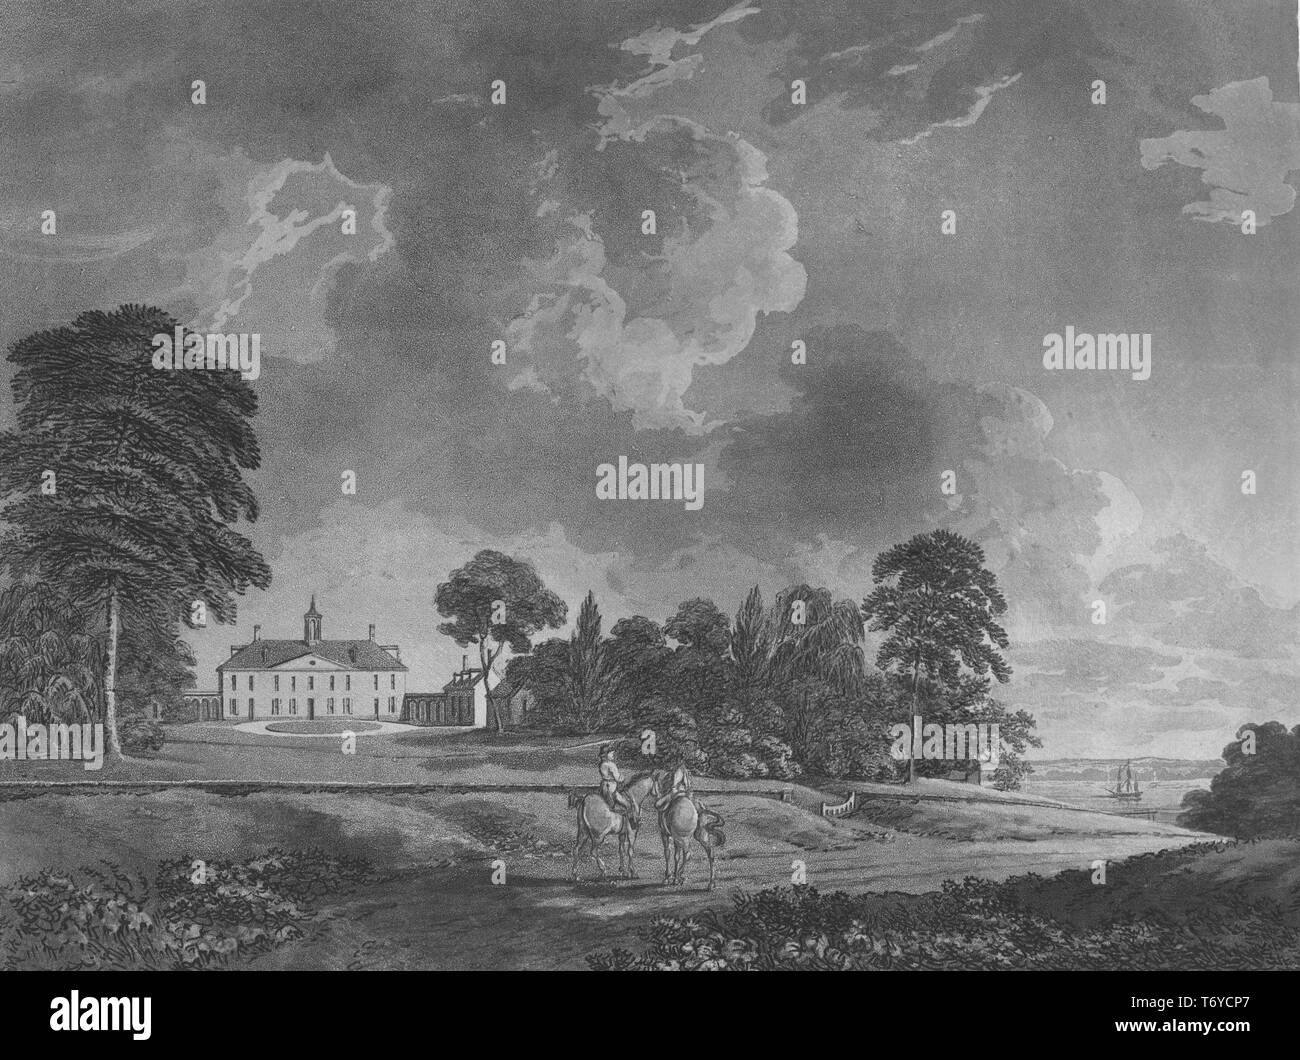 Engraving of Mount Vernon, plantation house of George Washington, Founding Father of the United States and the first President of the United States, 1837. From the New York Public Library. () Stock Photo